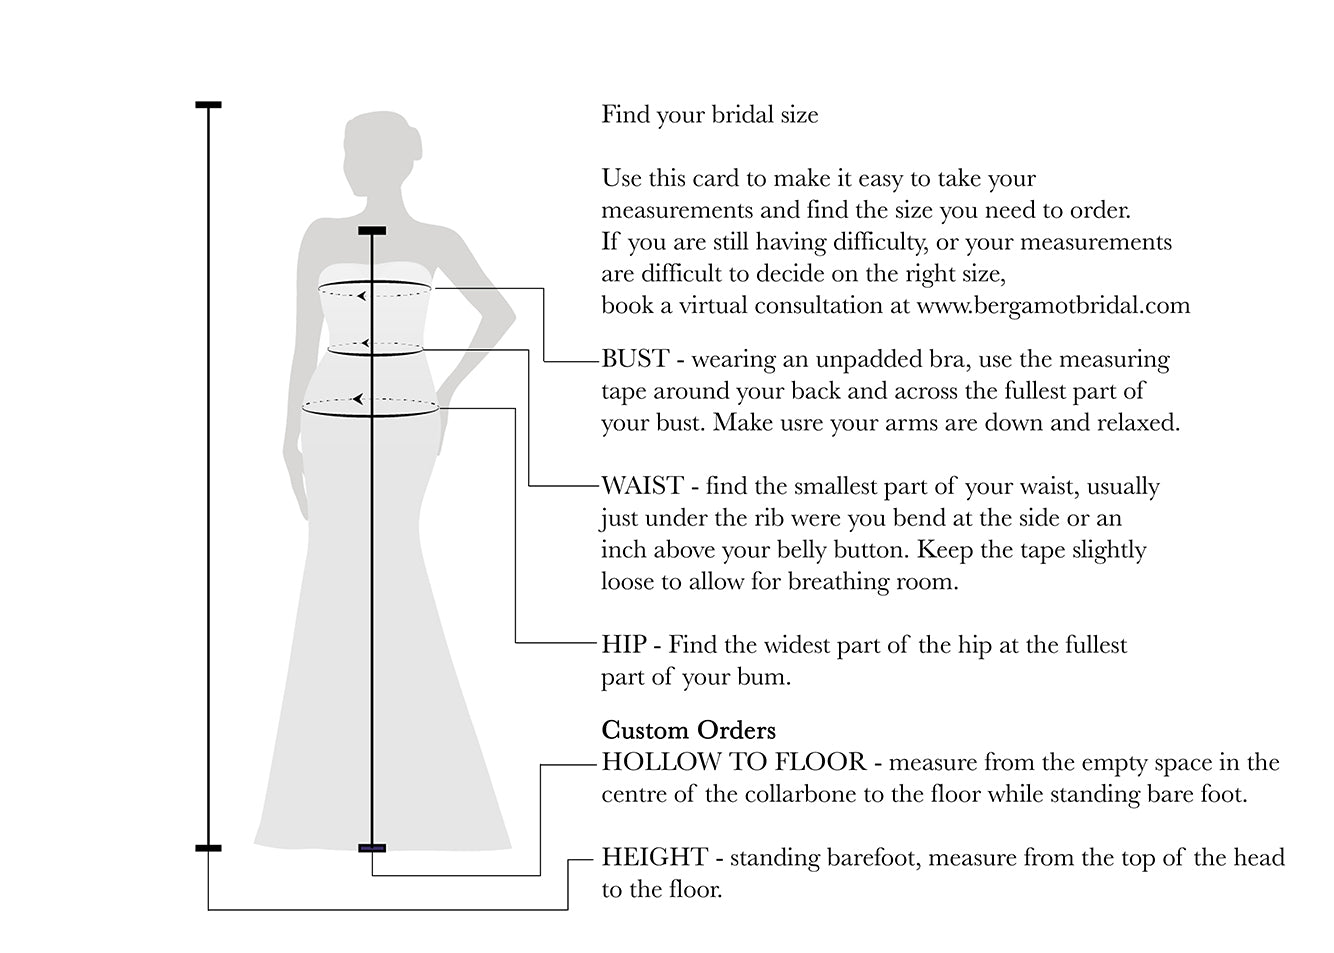 Illustration showing how to take body measurements for a Bergamot Bridal Crepe and Lace Fit and Flare Dress with Illusion Scalloped Train, including bust, waist, hips, and hollow to floor, with a list of instructions.